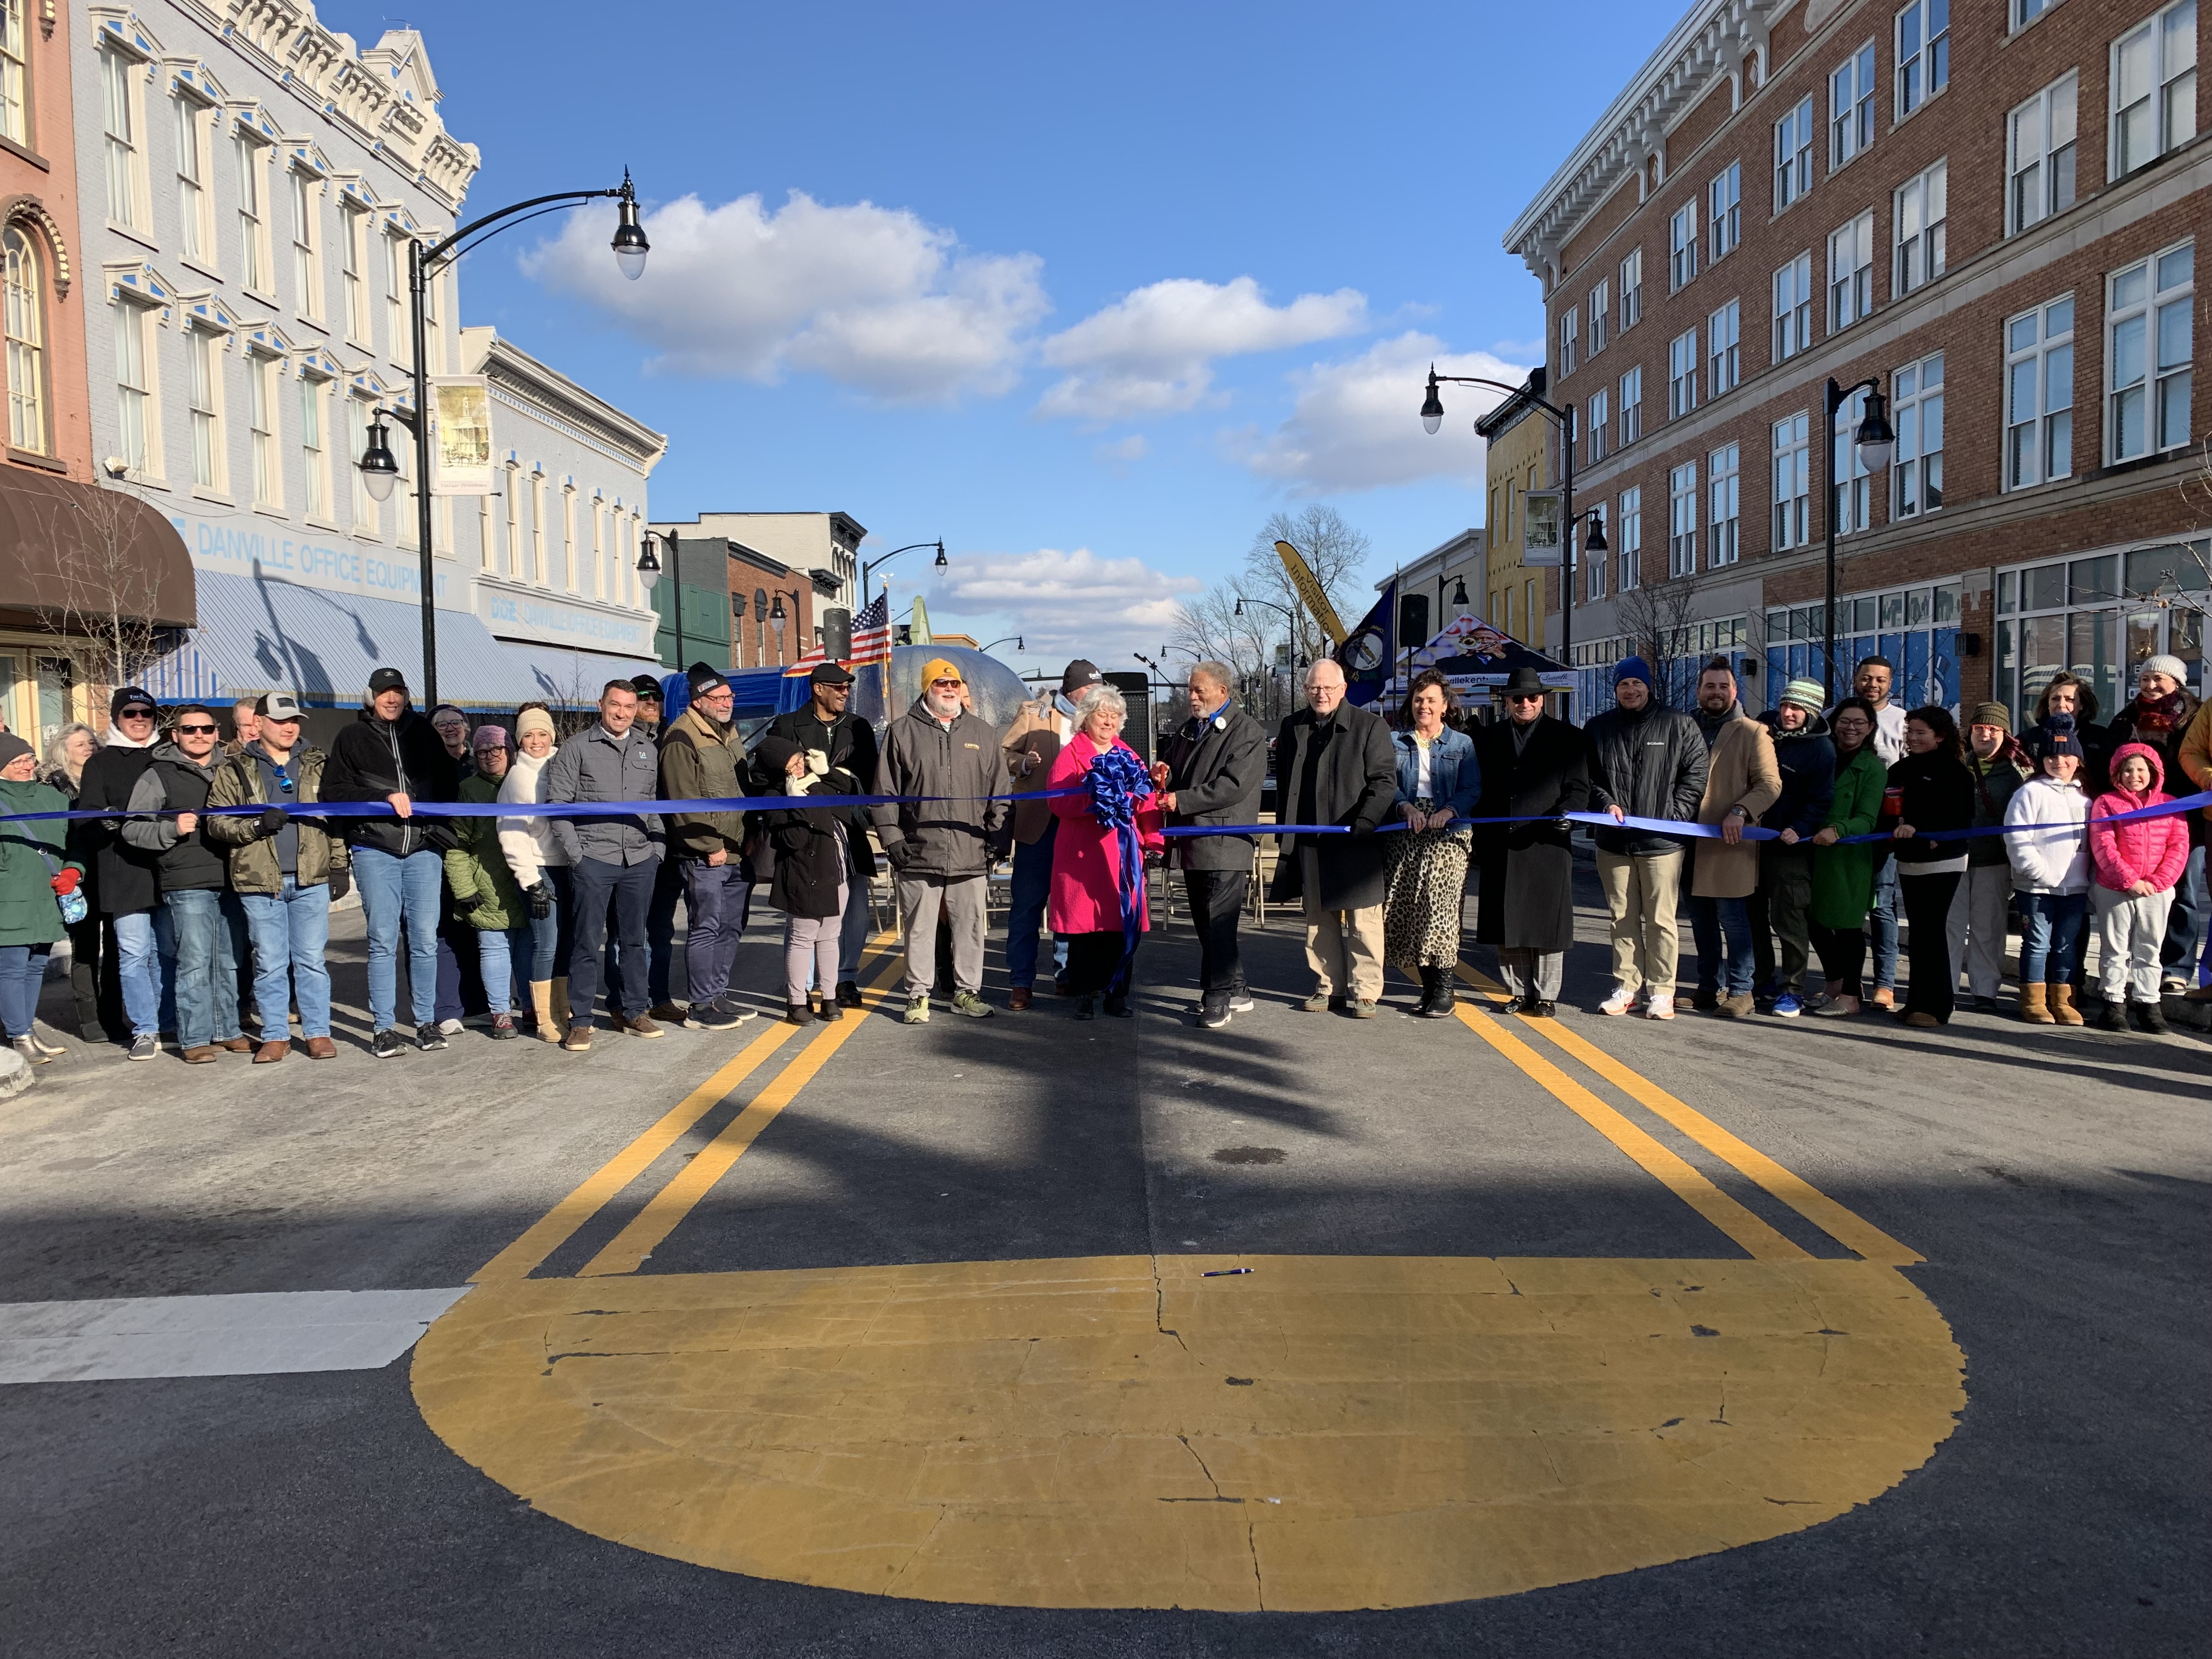 City officials perform a ribbon cutting ceremony on Main Street in Danville after embracing the complete streets concept